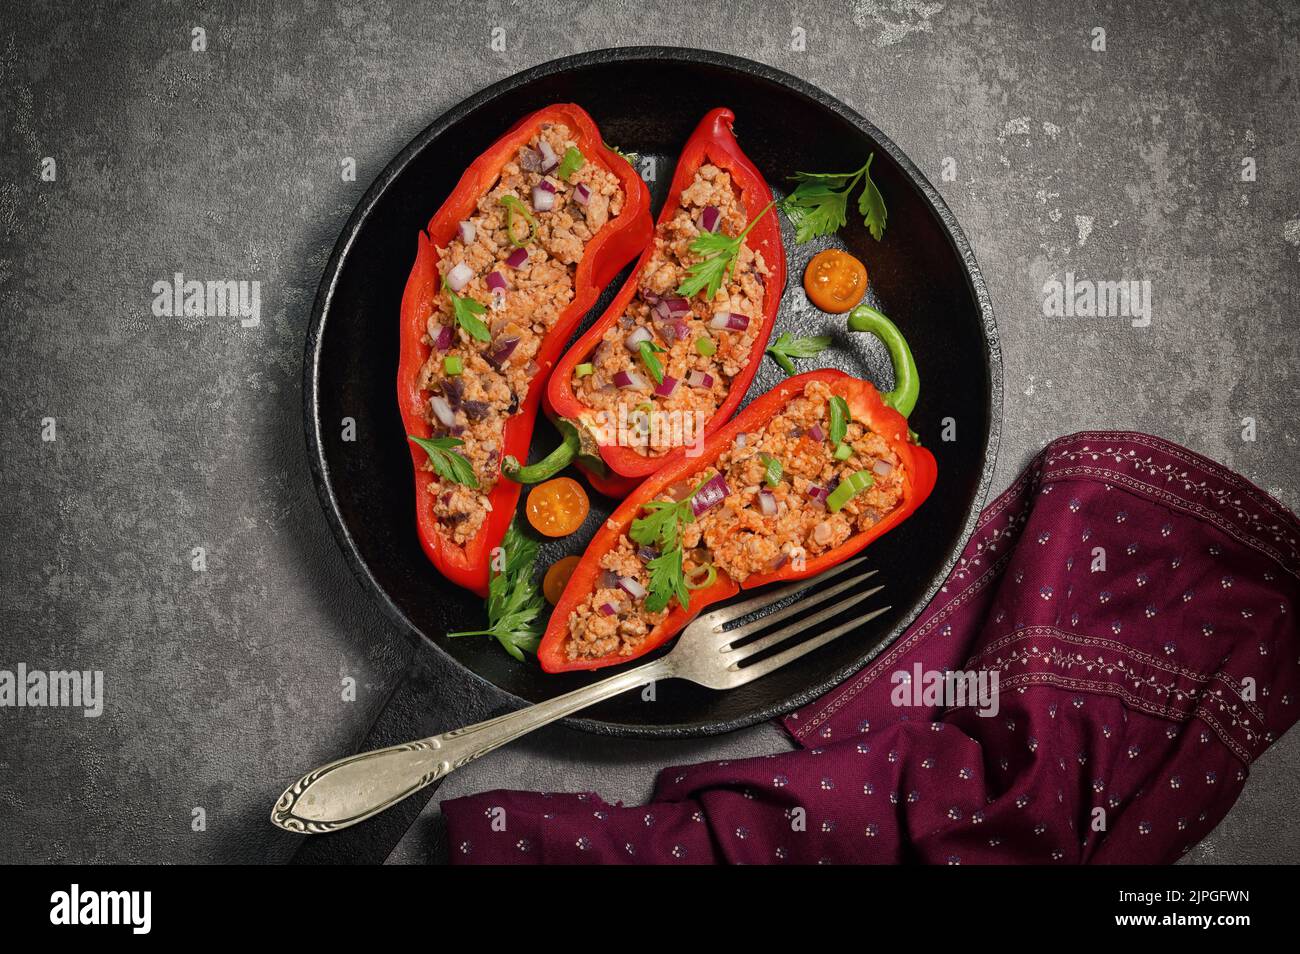 Red Bell Stuffed with Minced Meat and Vegetables in Pan Stock Photo